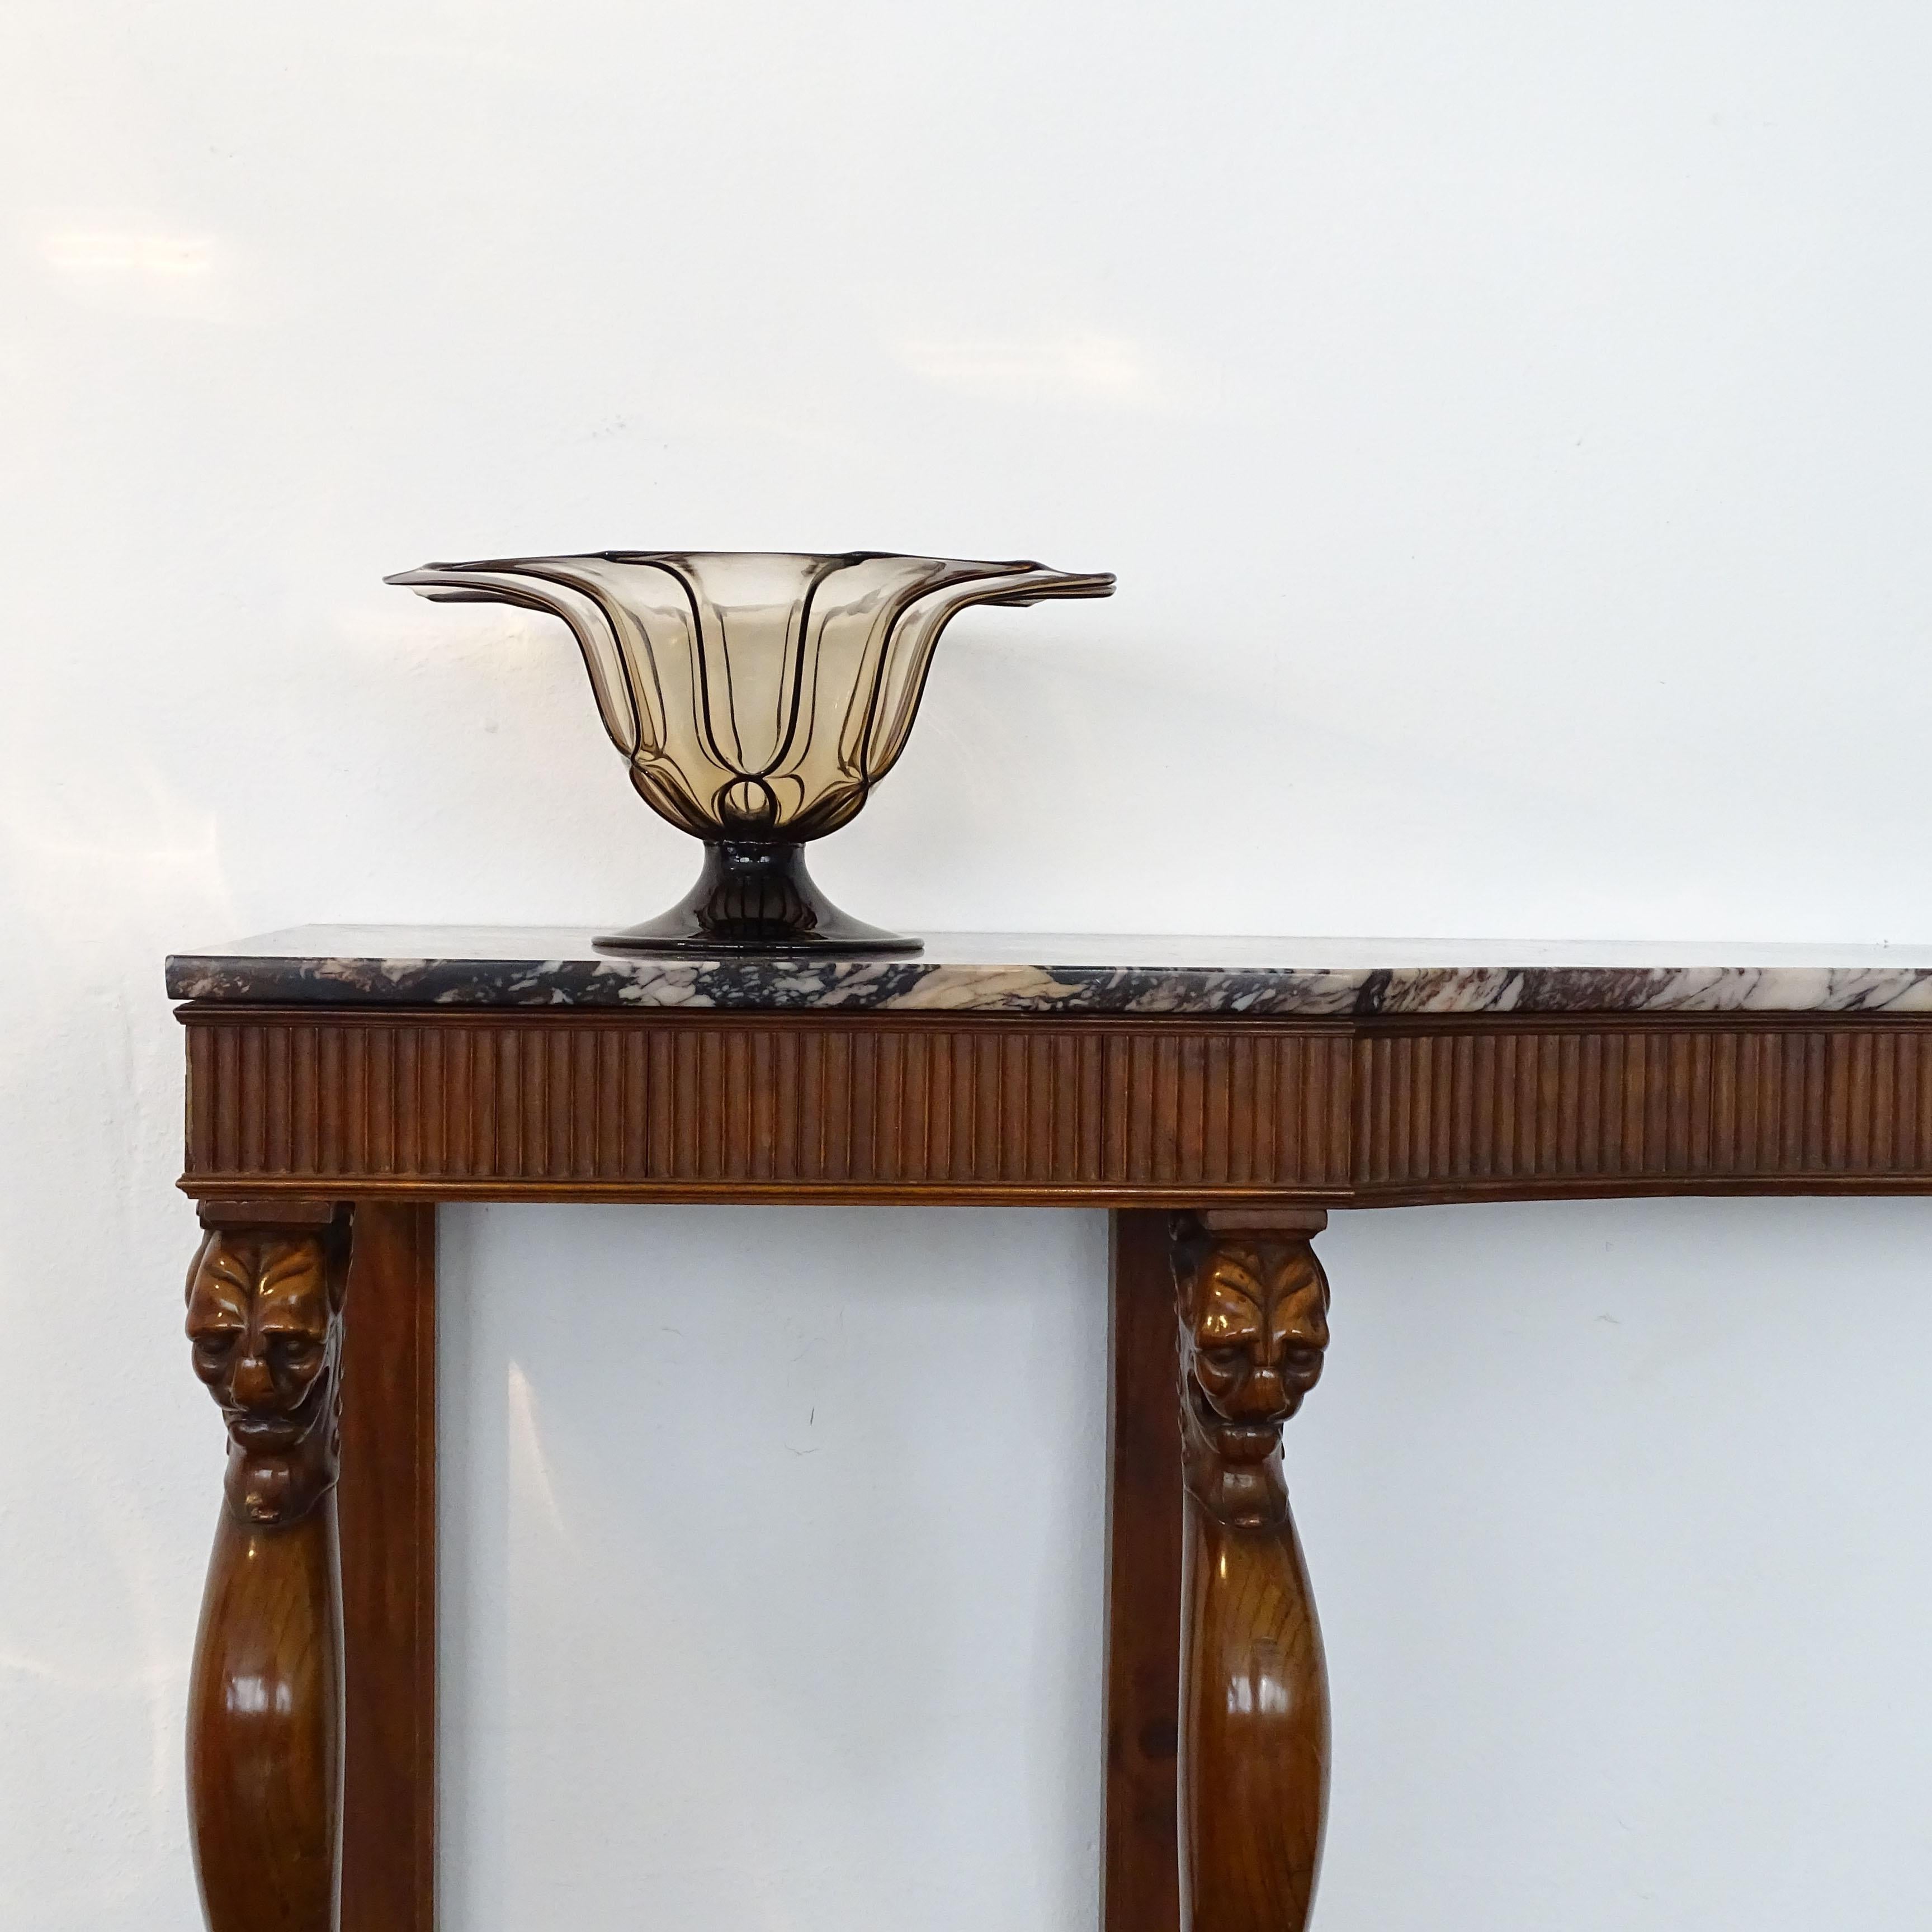 Outstanding Italian 1920s console with feline sculpted legs and marble top.